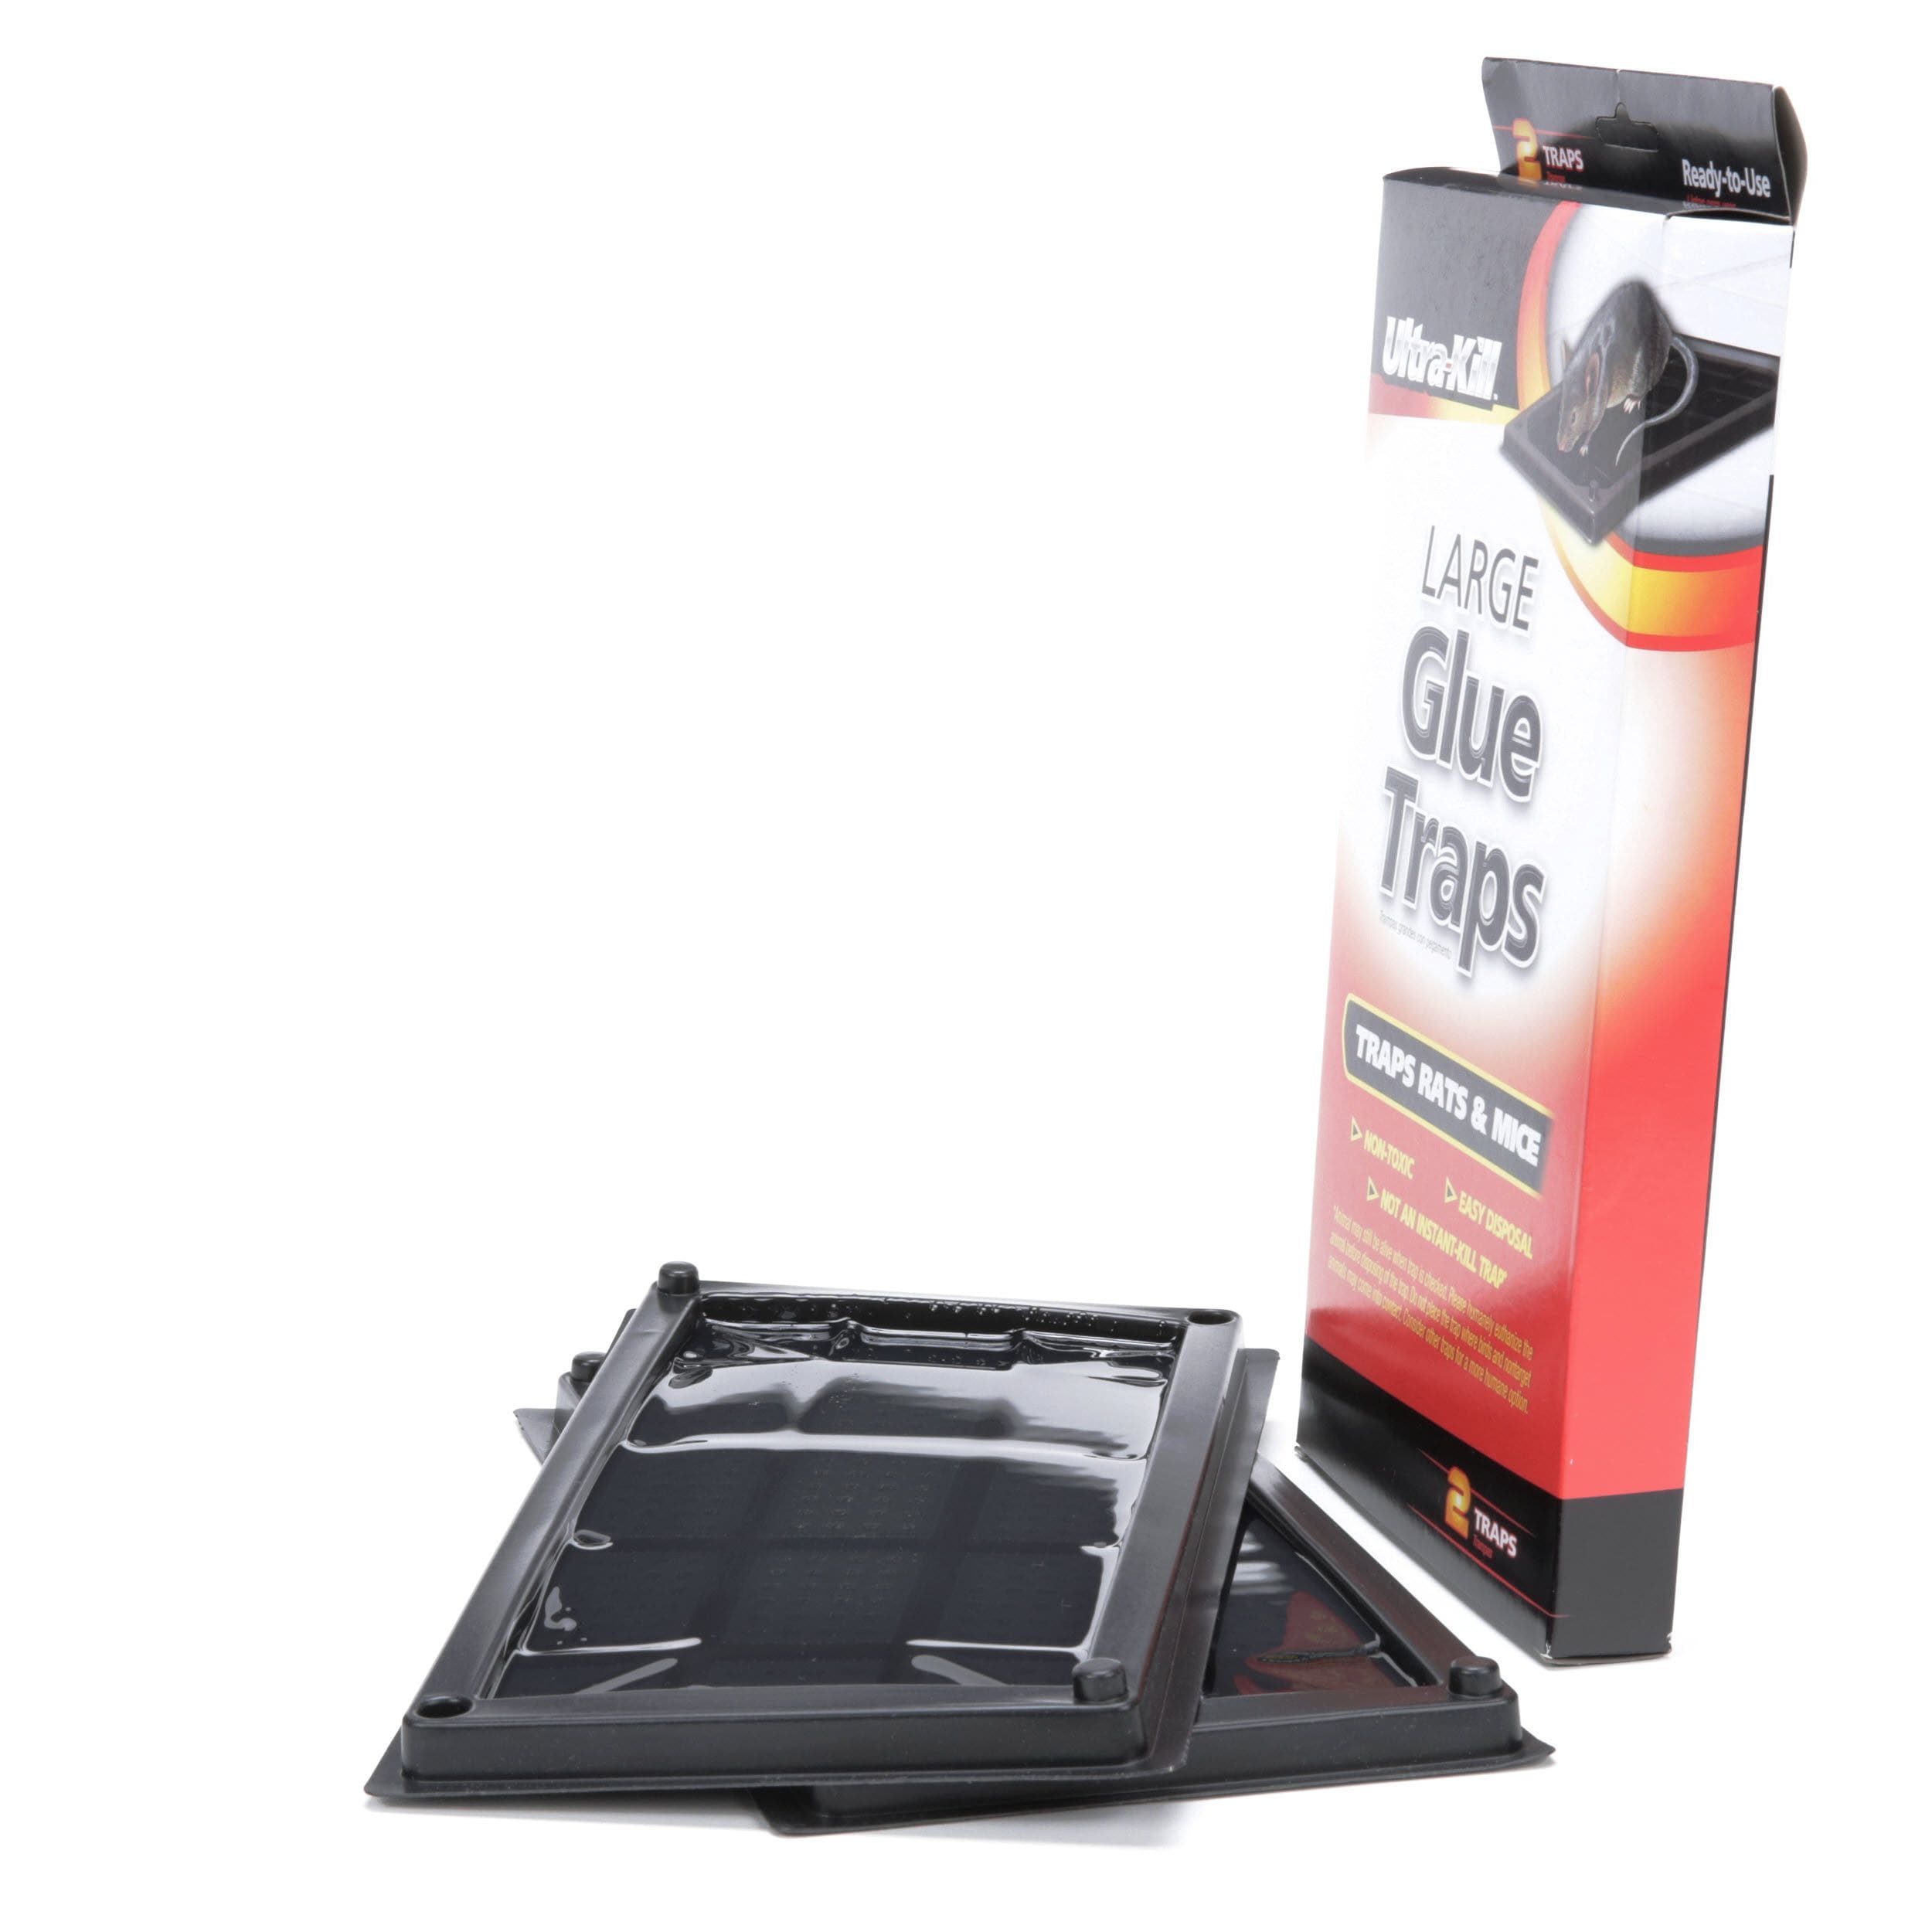 Ultra-Kill 2ct- Large Rat and Mouse Glue Traps Mouse Traps in the Animal &  Rodent Control department at